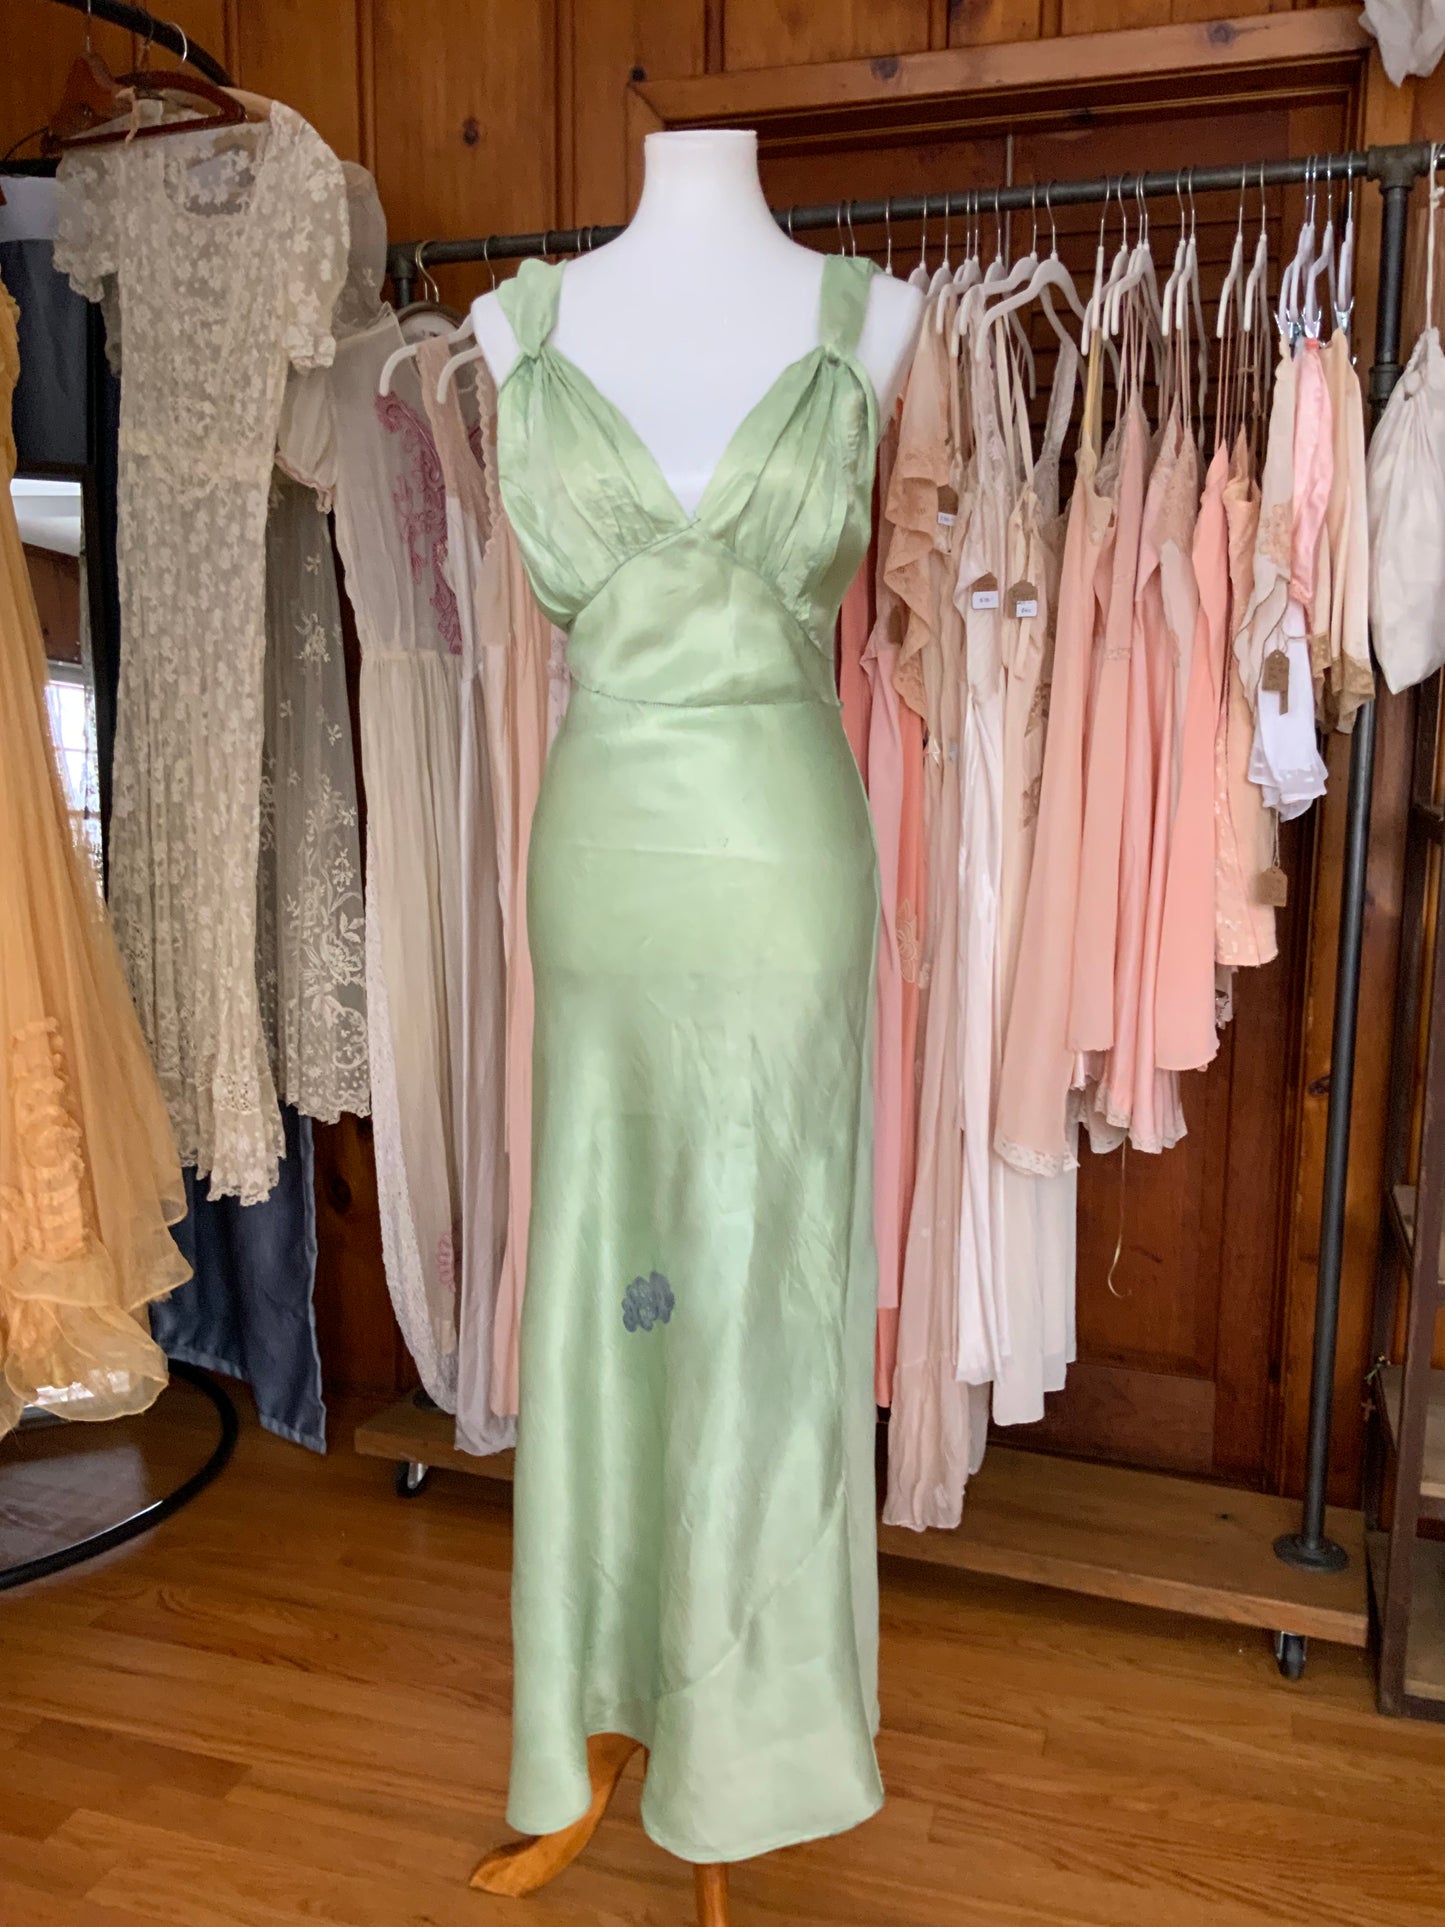 Hand Dyed Nightgown/Slip Dress - 50s - Bridal